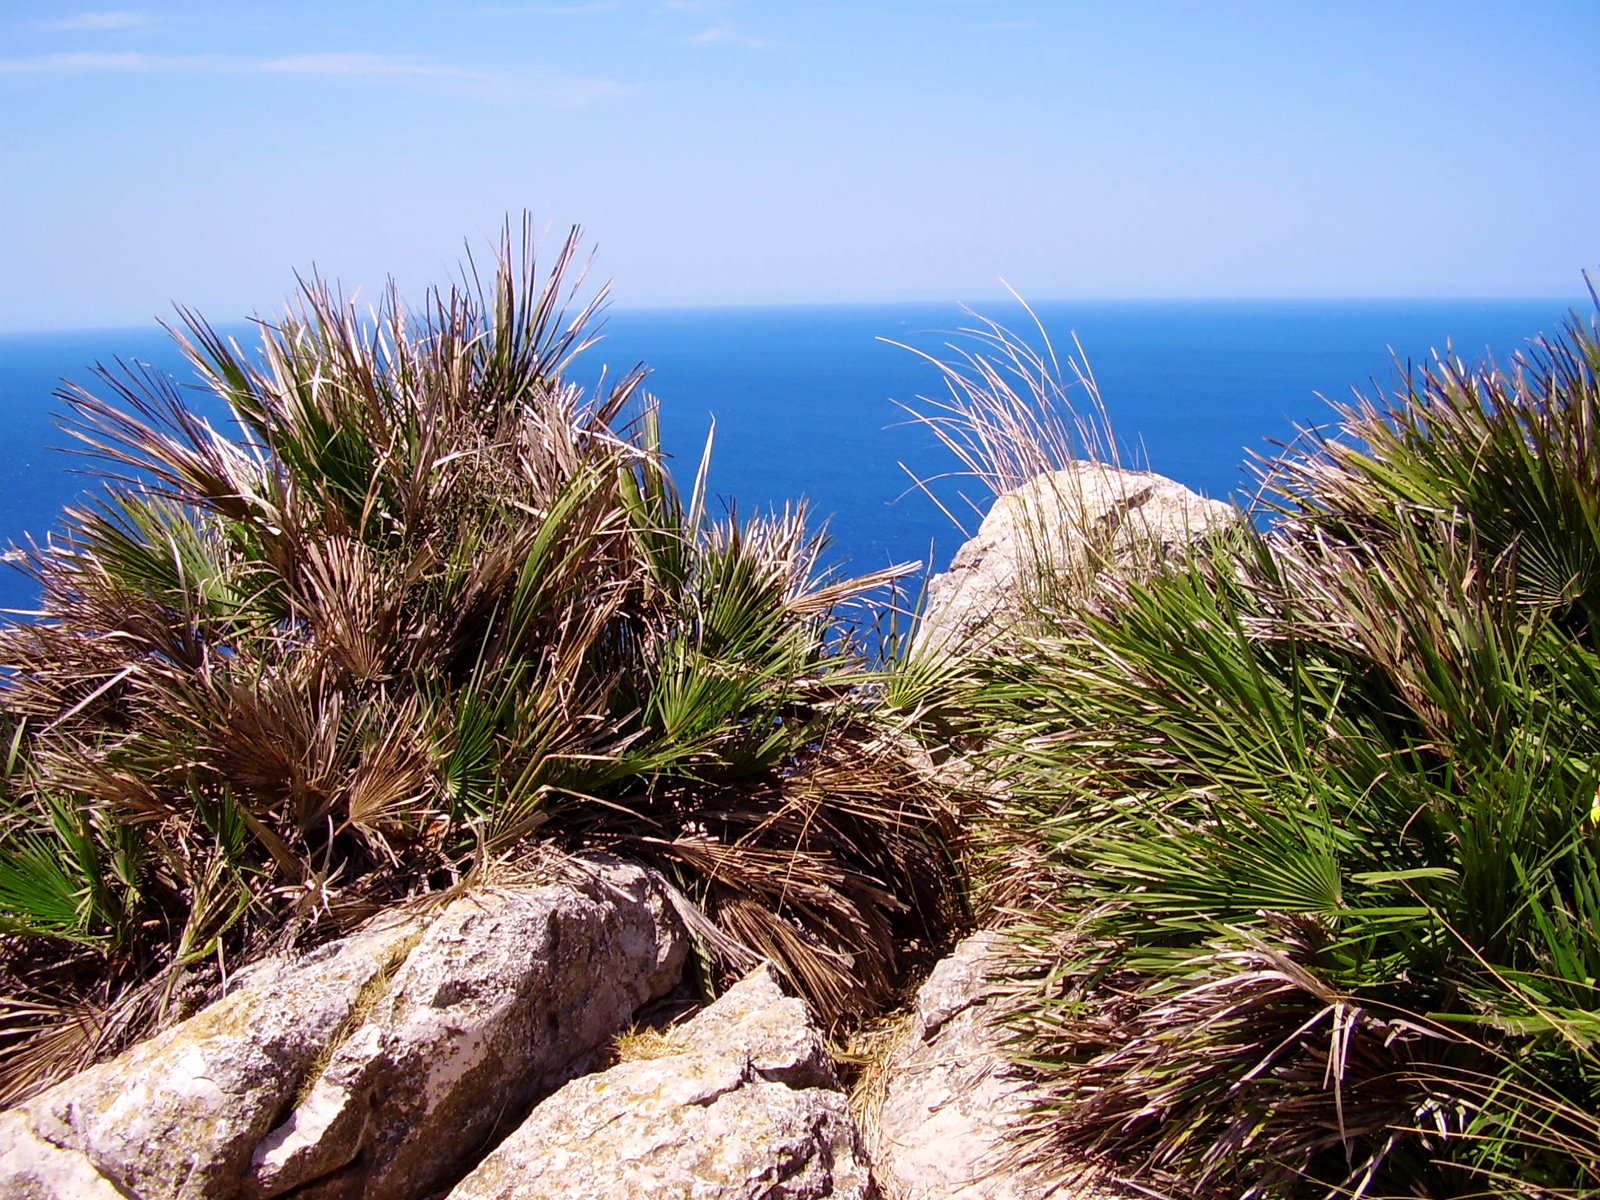 there is some vegetation growing on rocks by the ocean